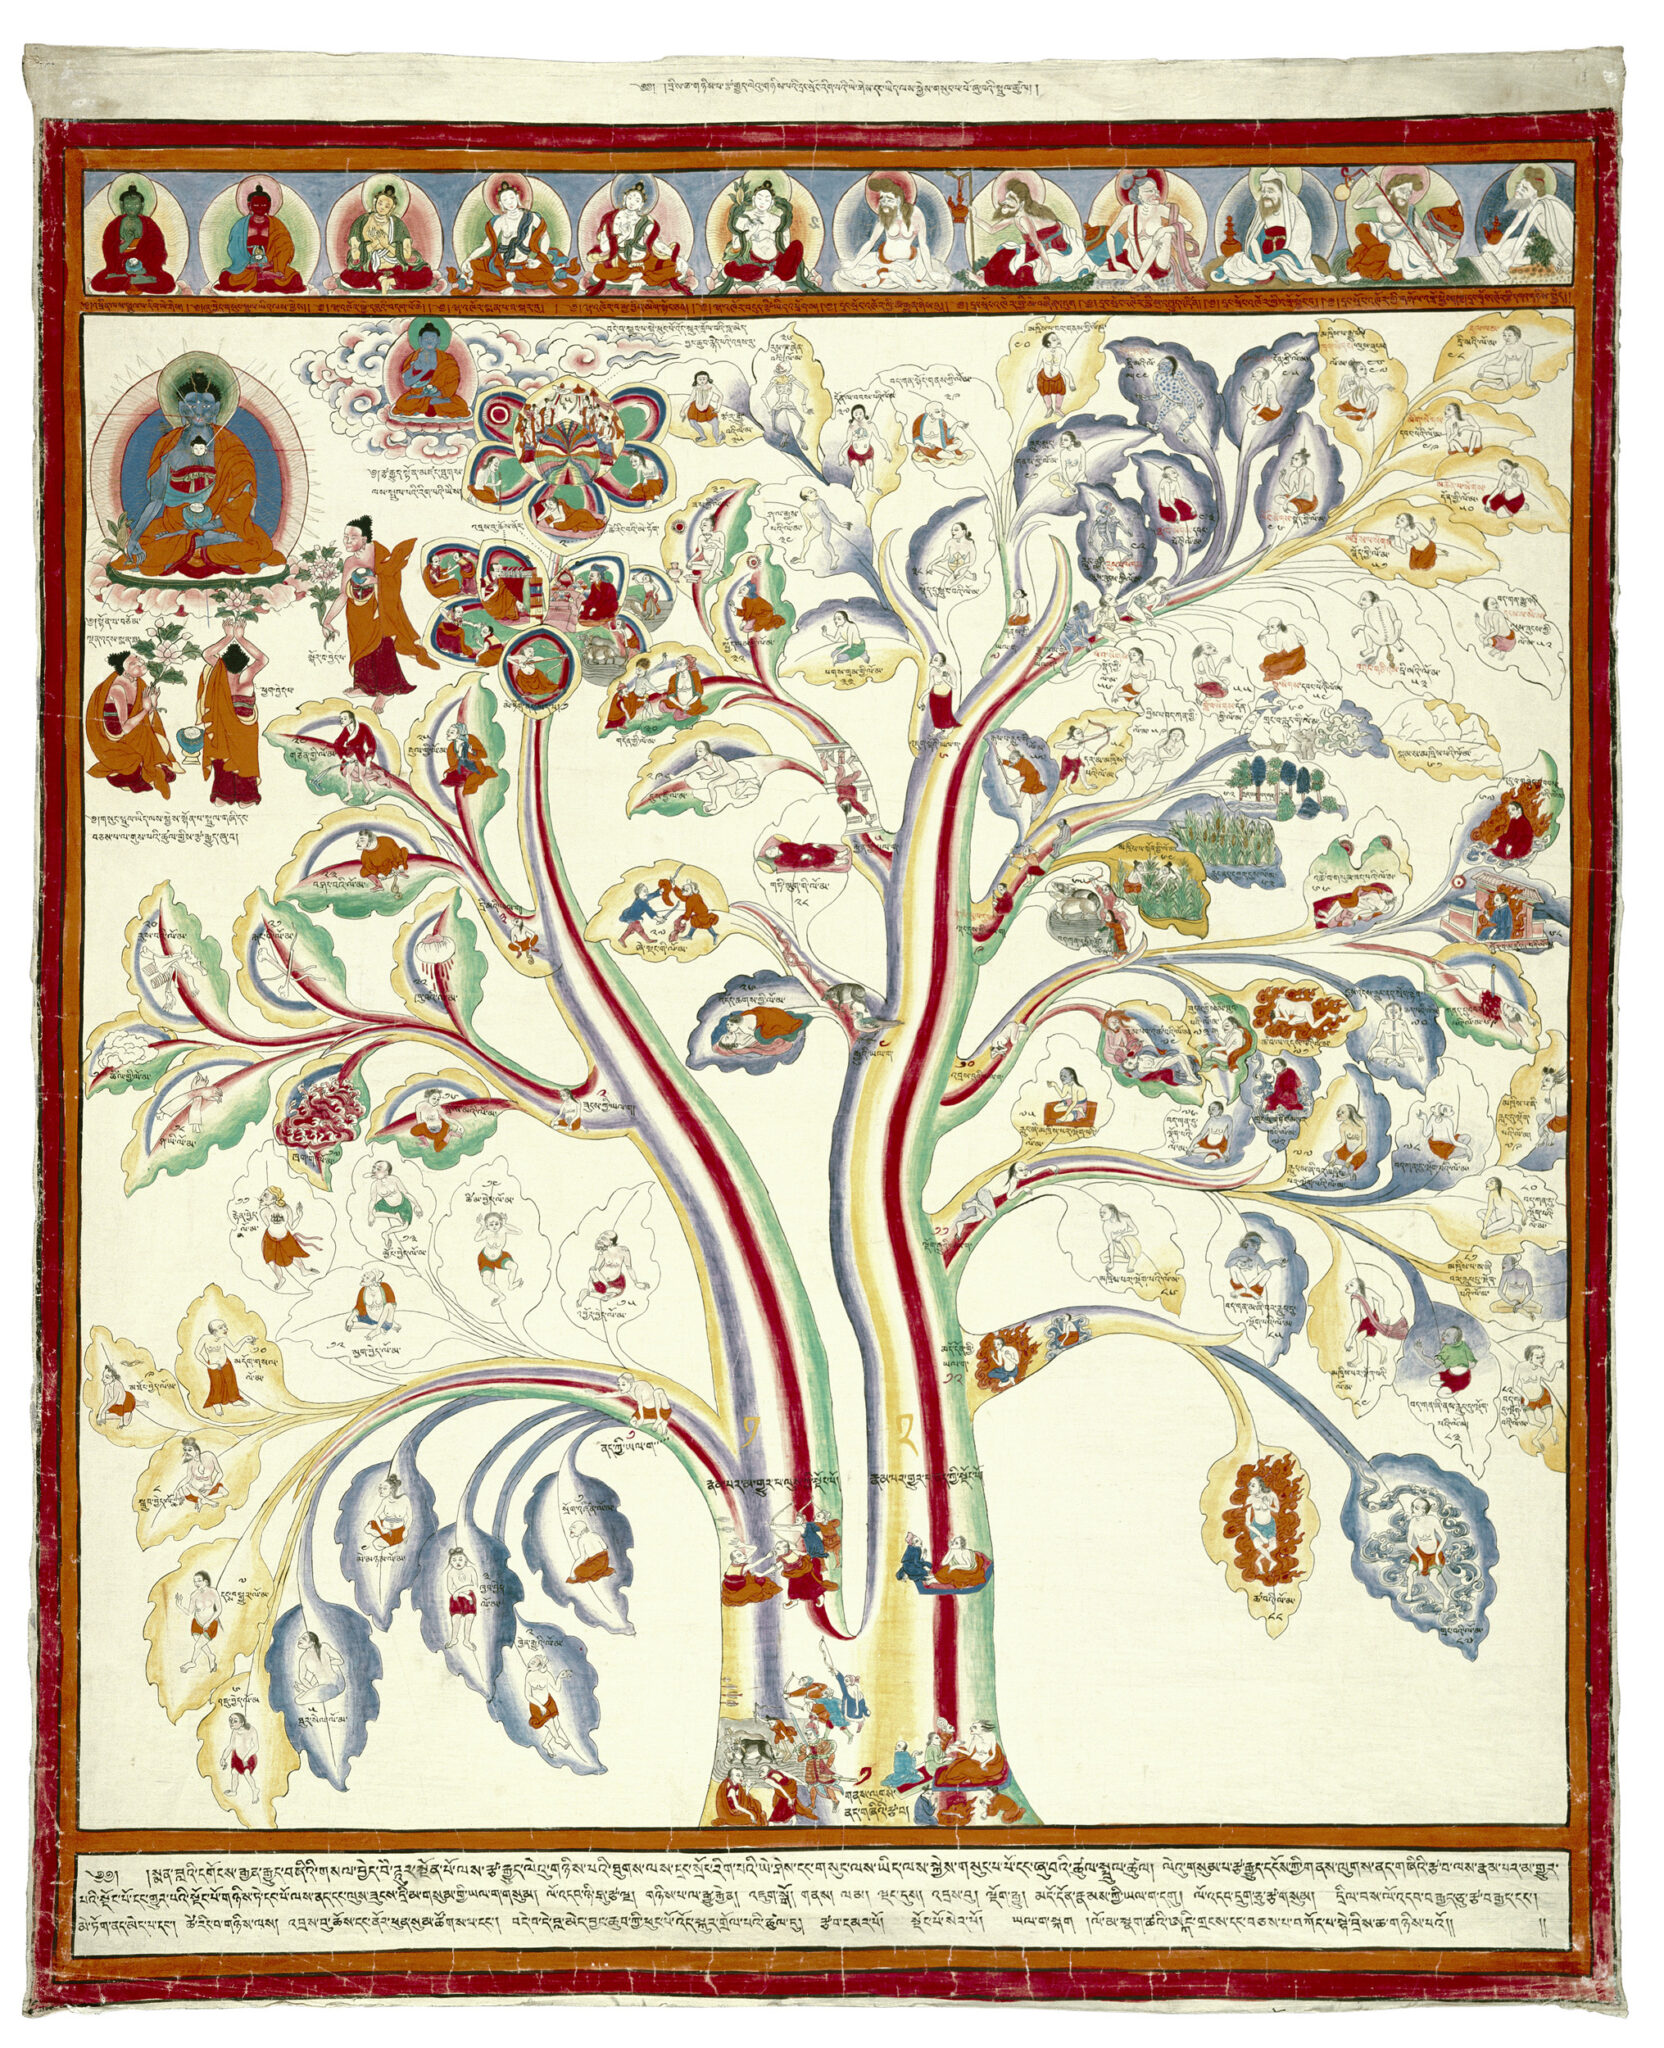 Colorful illustration in the form of tree with many branches and leaves, each containing iconographic information